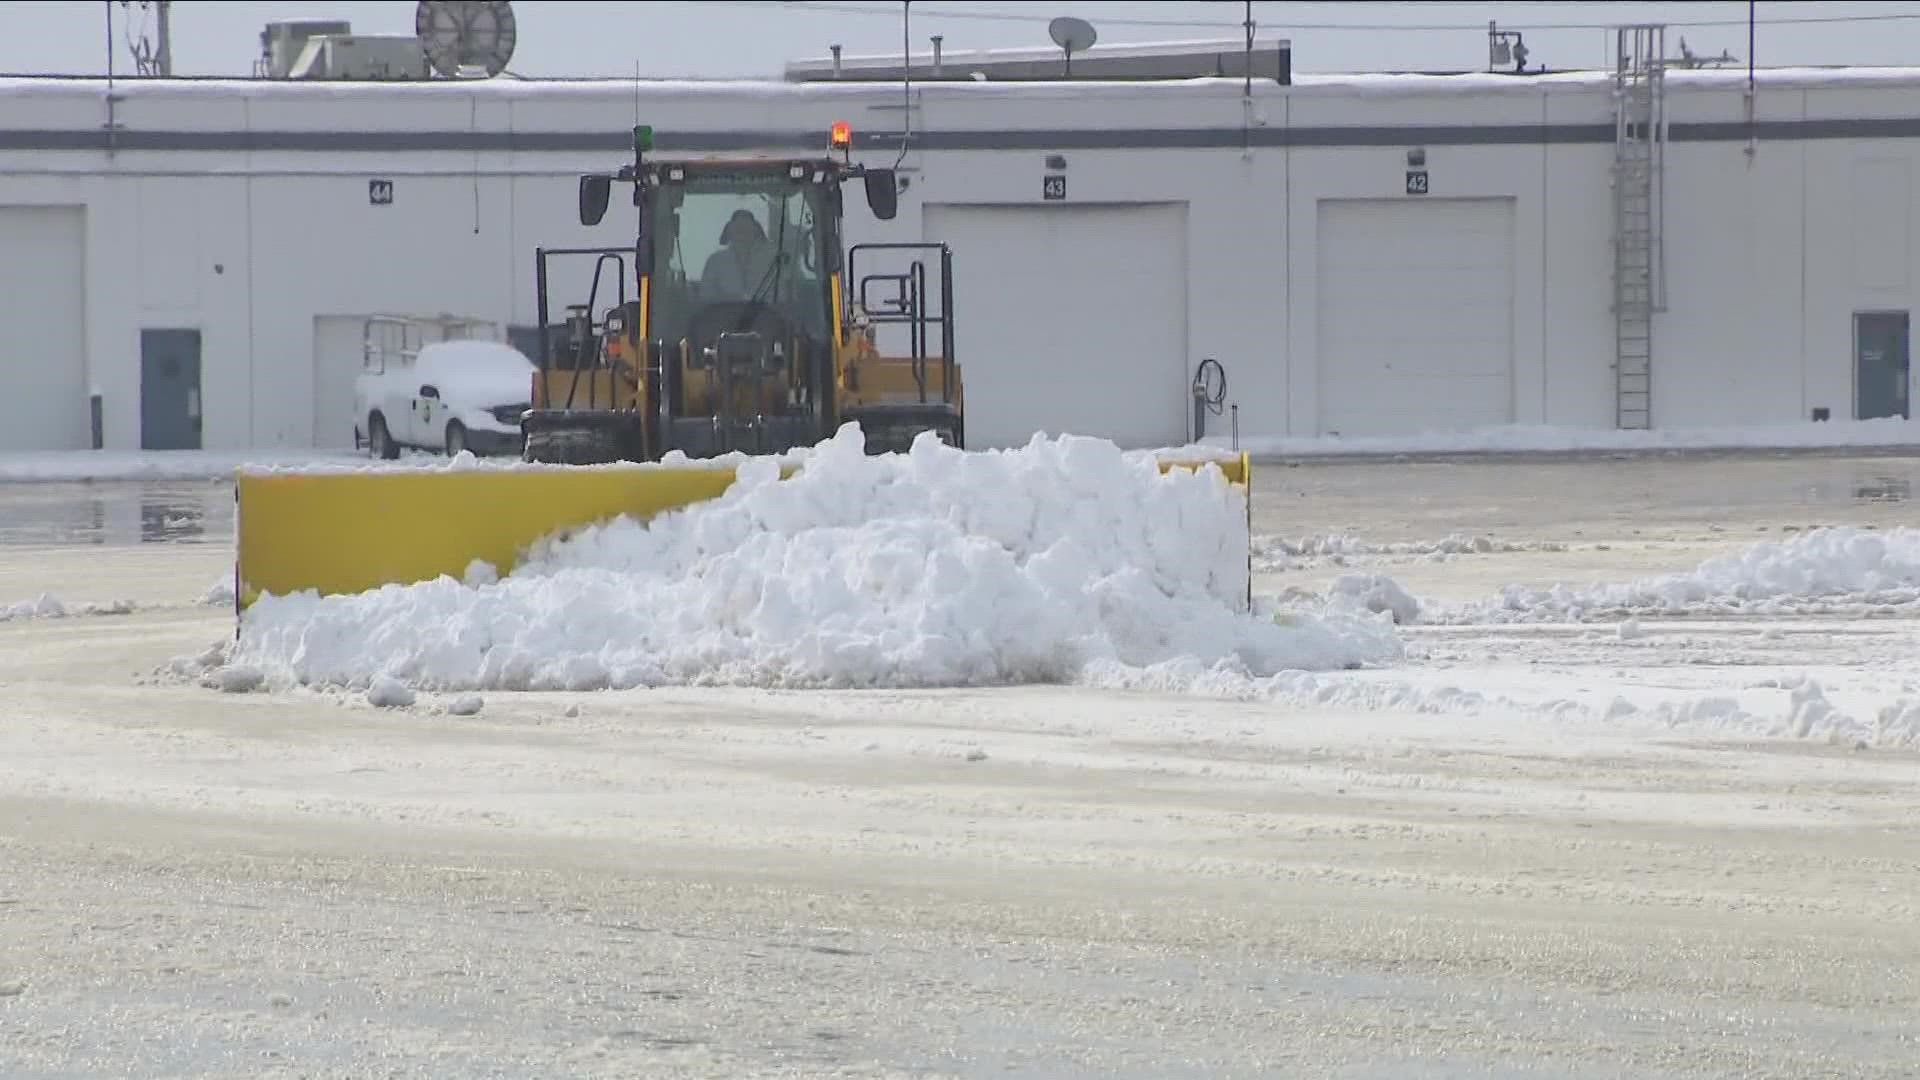 CREWS ARE PRE-TREATING RUNWAYS AND WILL DO EVERYTHING THEY CAN TO KEEP OPERATIONS OPEN